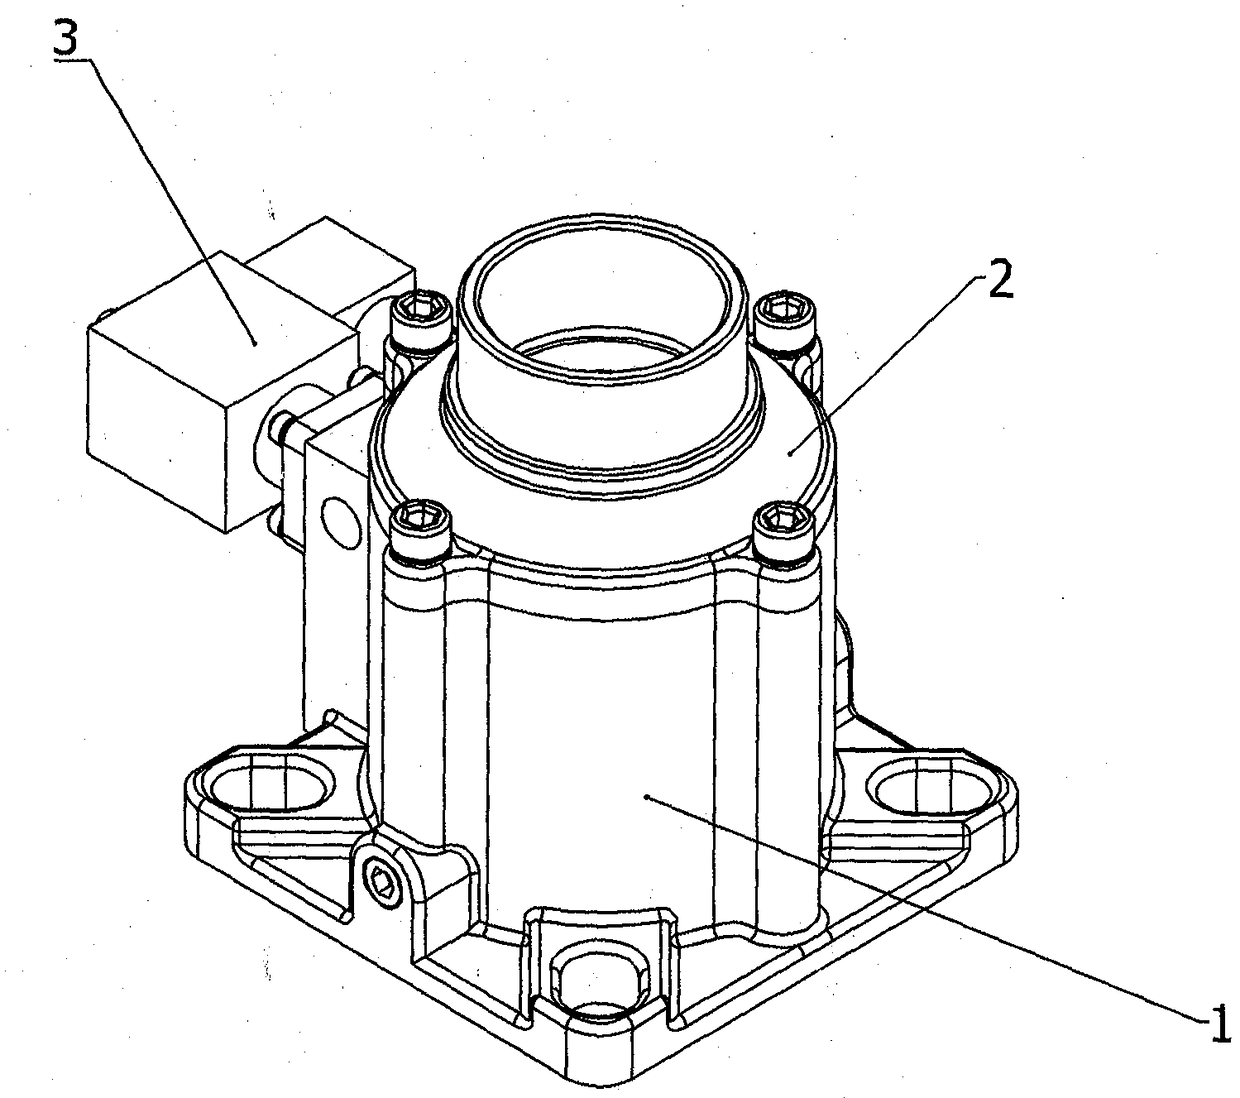 Normally-closed air inlet valve of air compressor